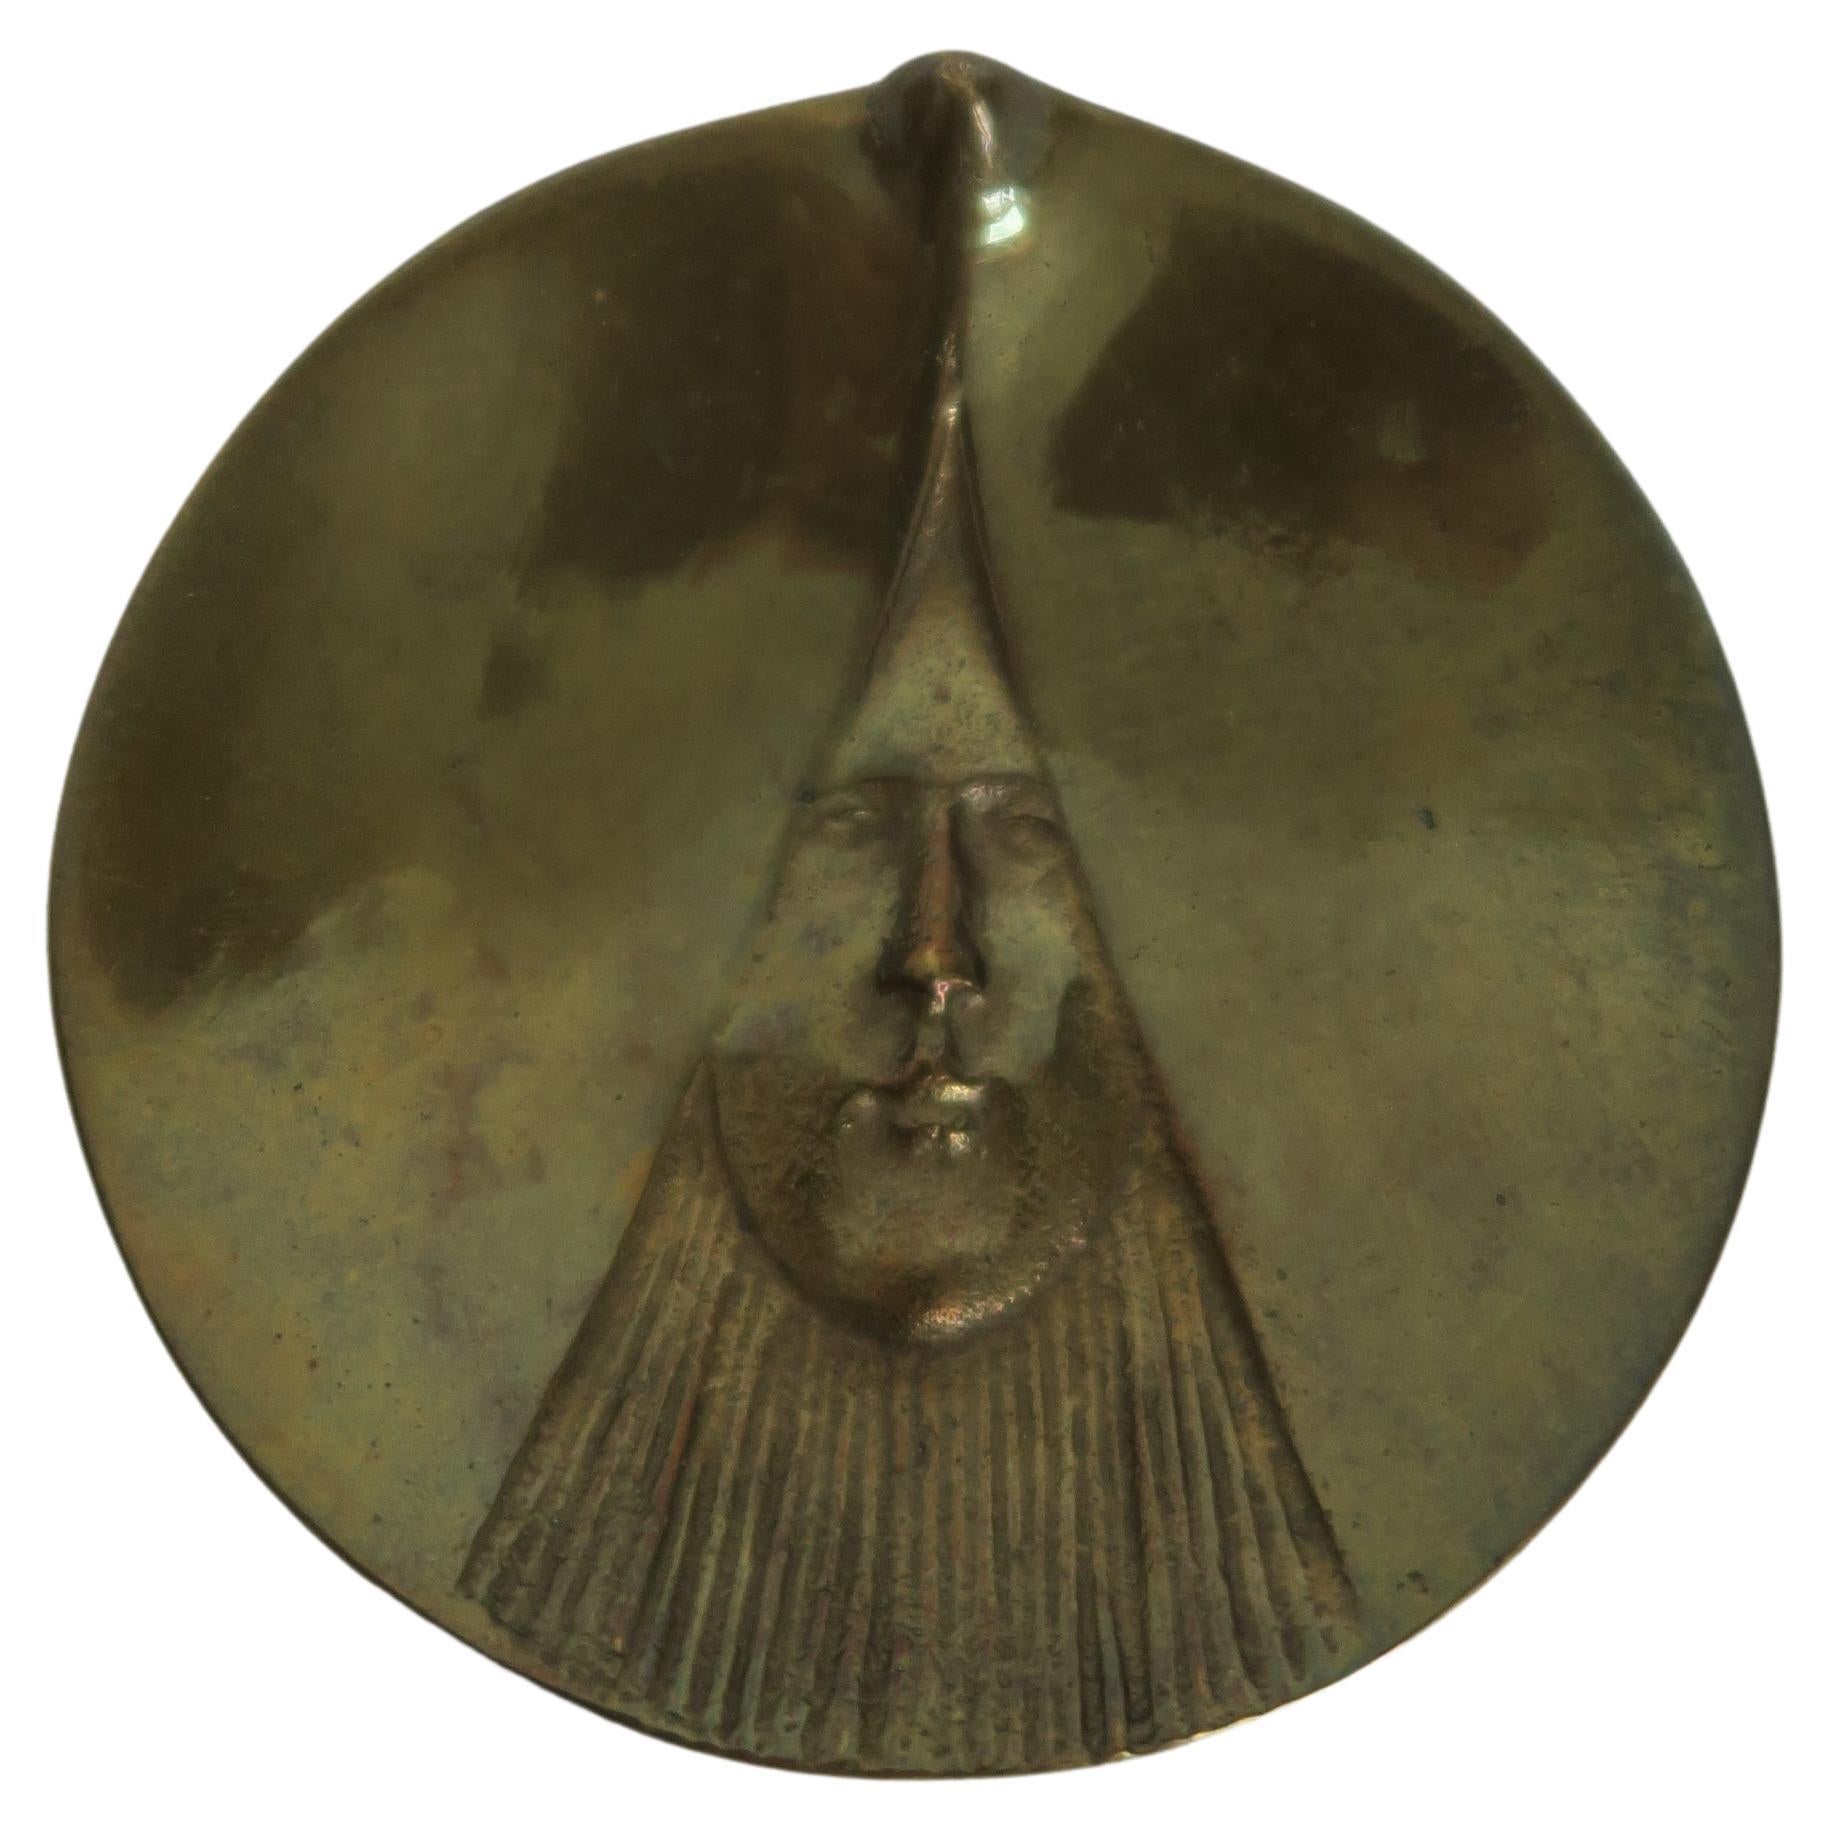 Karl Hagenauer Solid Brass Face Ashtray, Designed 1900, Manufactured, 1950s